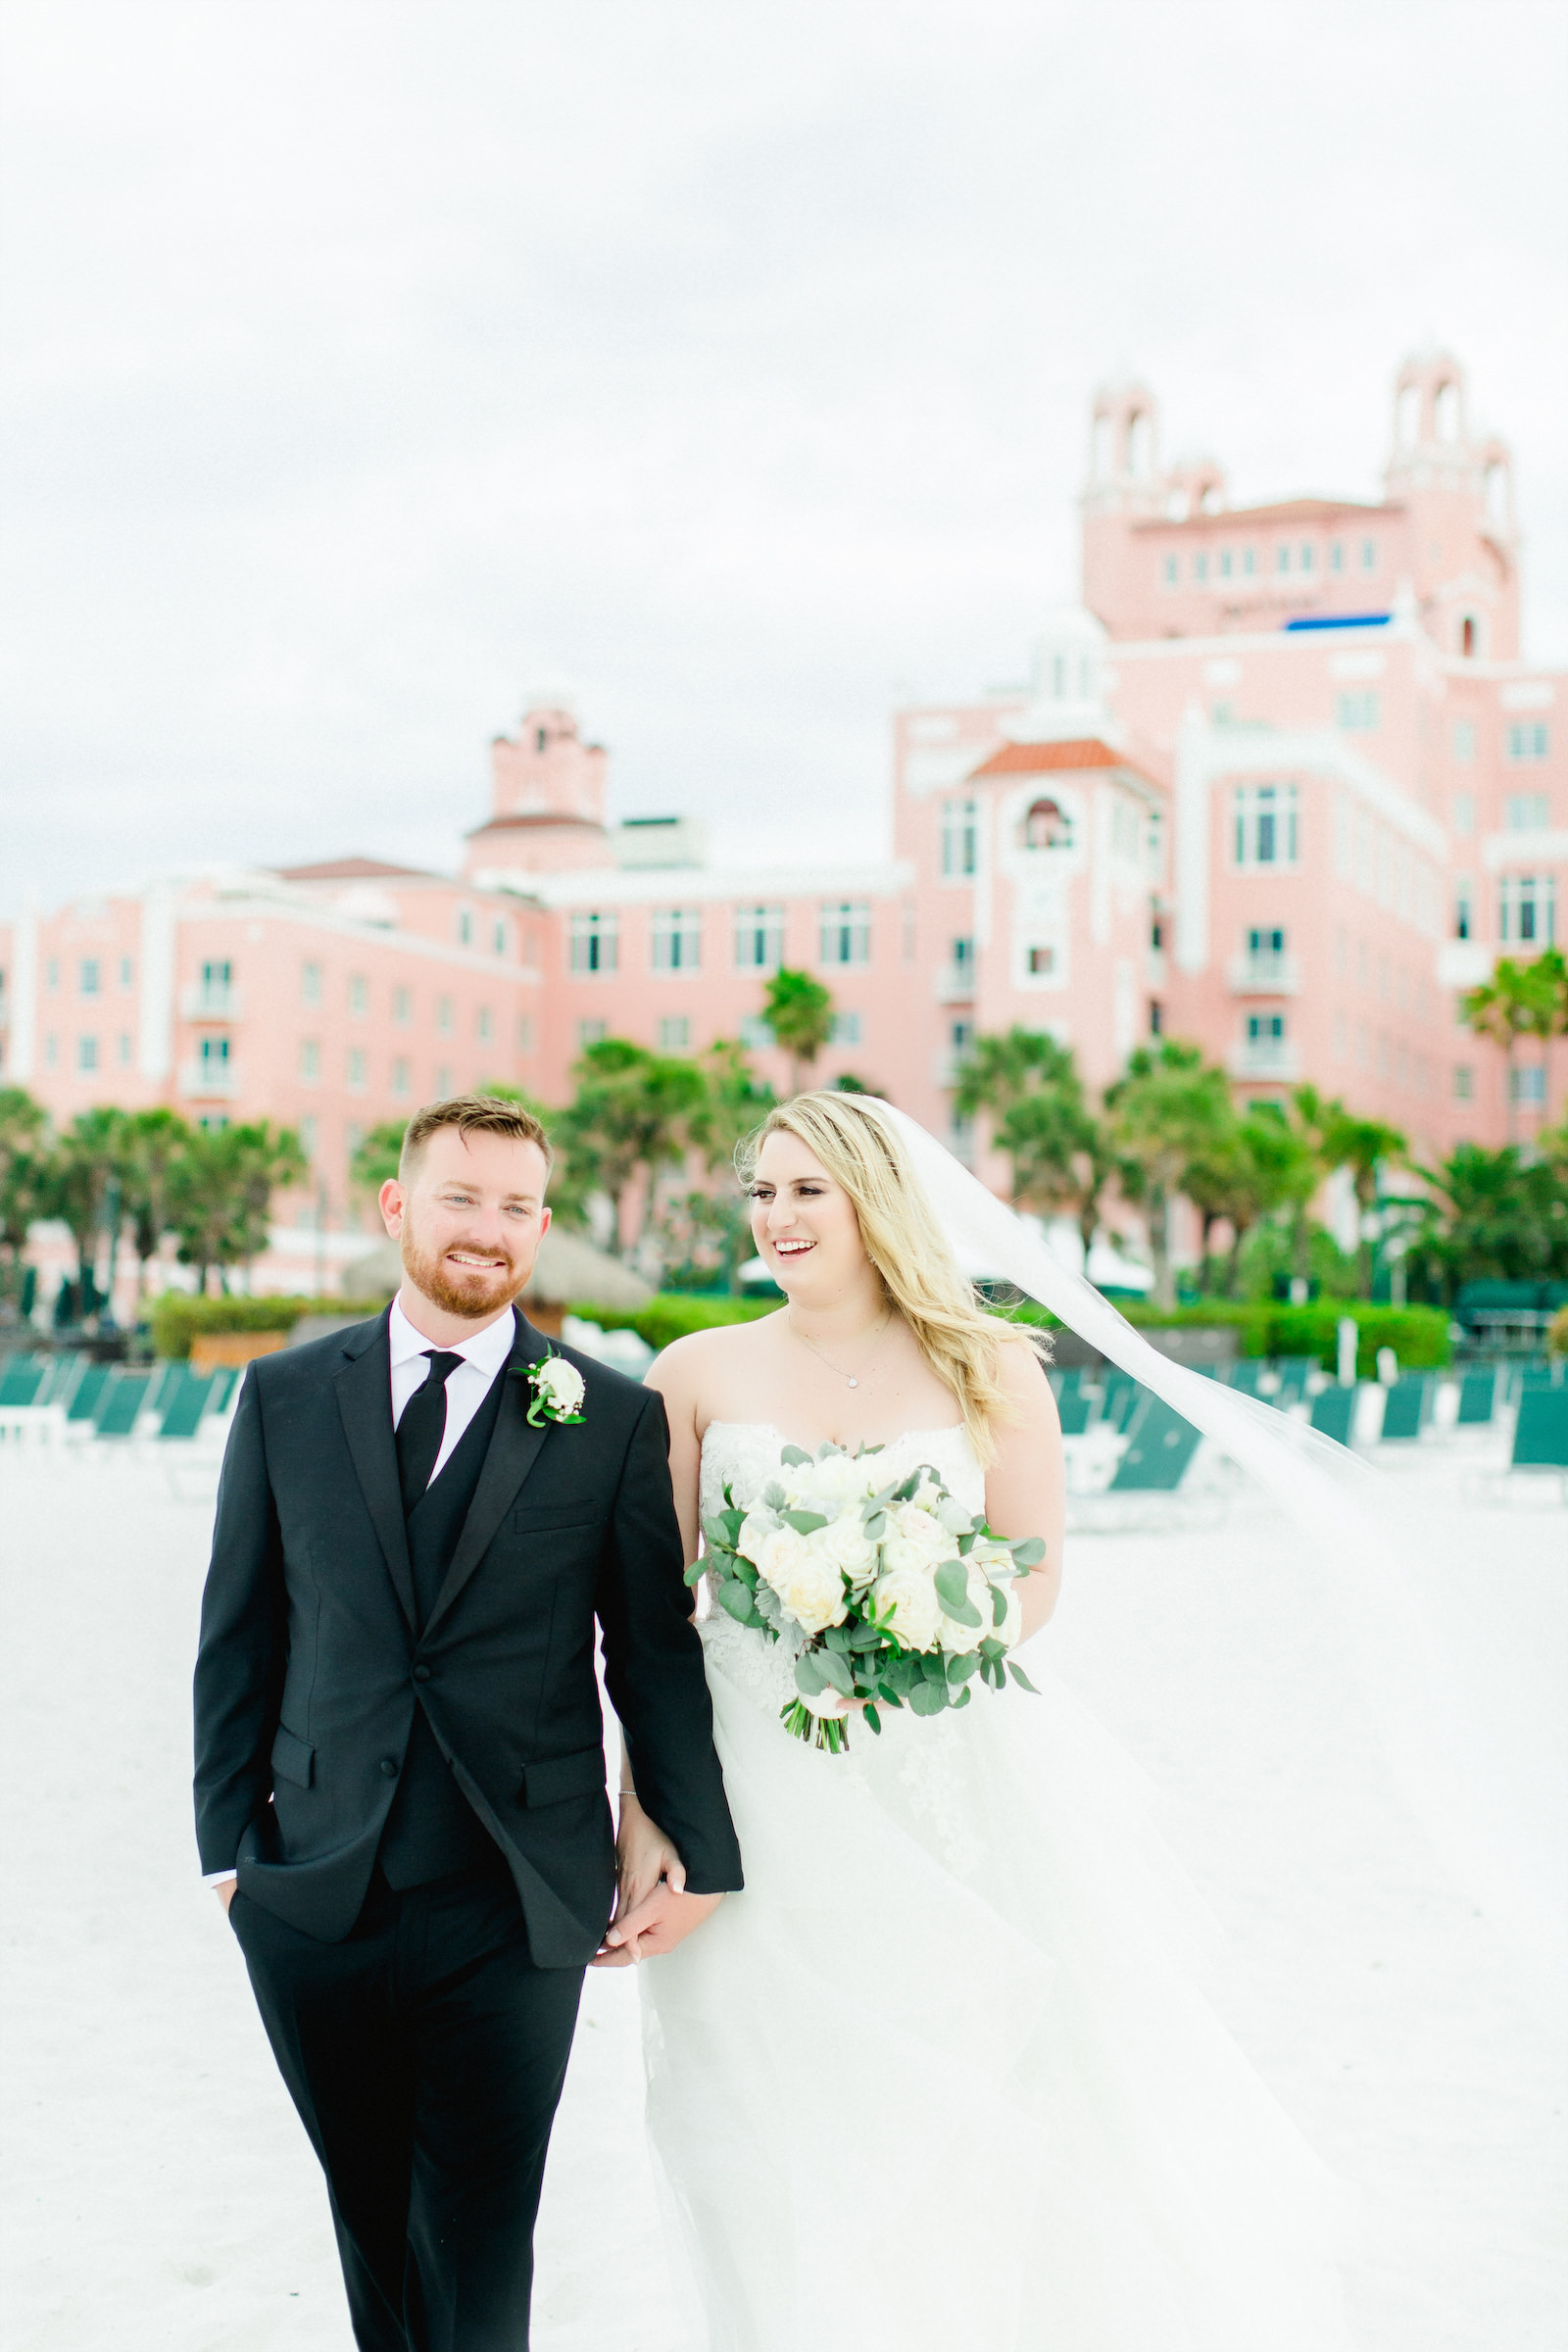 Lace Wedding Dress Bridal Gown with Long Cathedral Veil | Bride and Groom Outdoor Hotel Beach Portraits | St Pete Beach Wedding Venue The Don Cesar | Classic Greenery White Flowers Bouquet | Groom Wearing Classic Black Suit Tux | Pink Palace